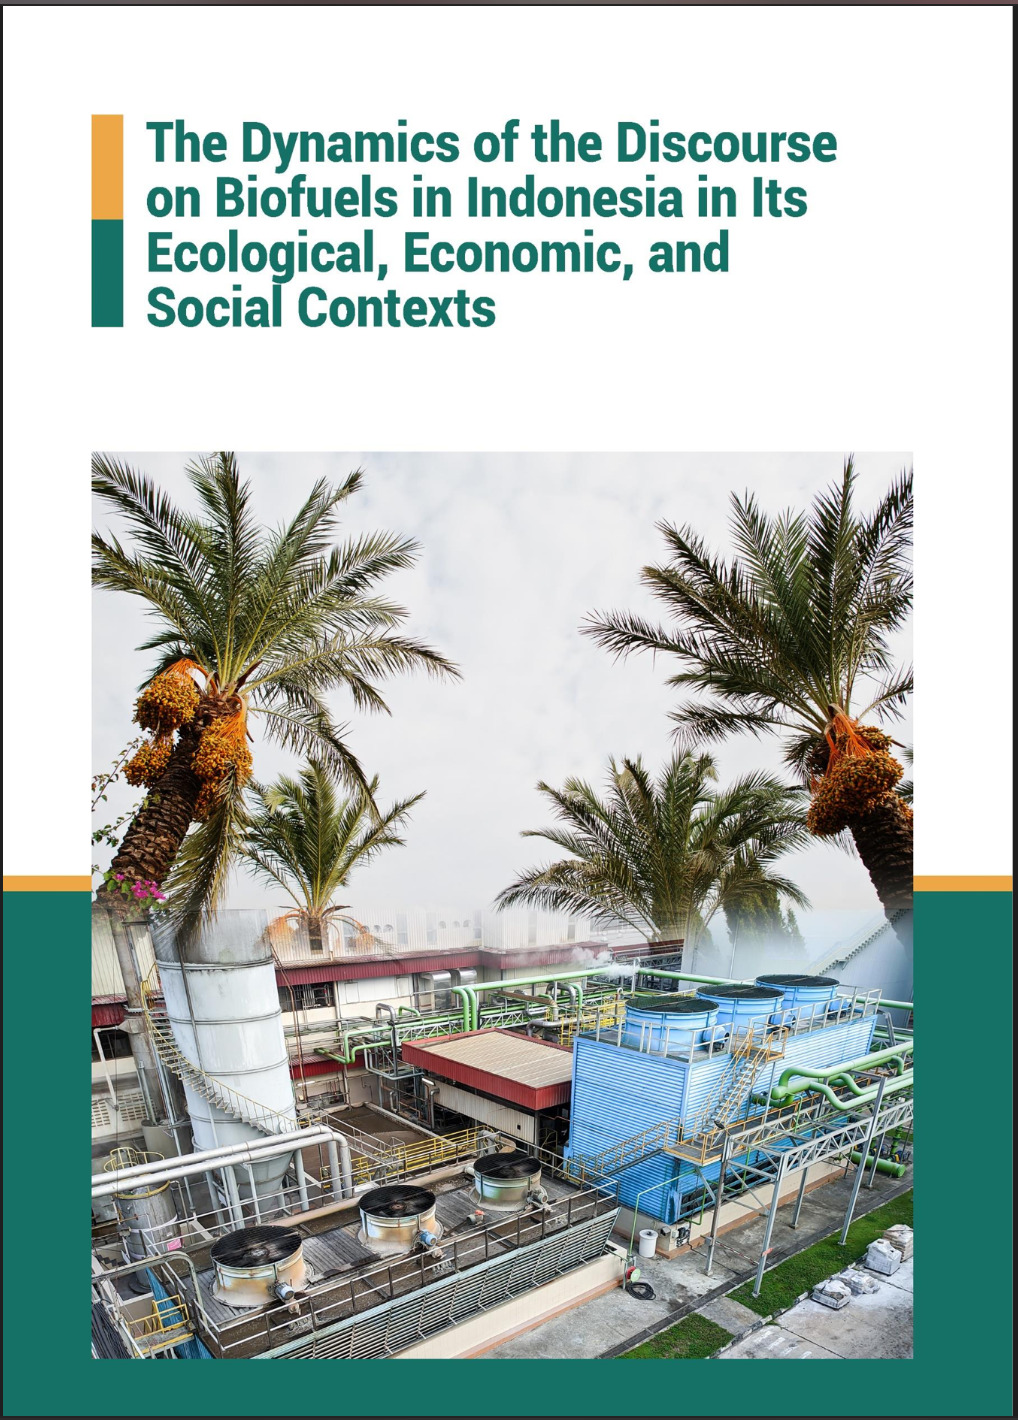 The Dynamics of the Discourse on Biofuels in Indonesia in Its Ecological, Economic, and Social Contexts